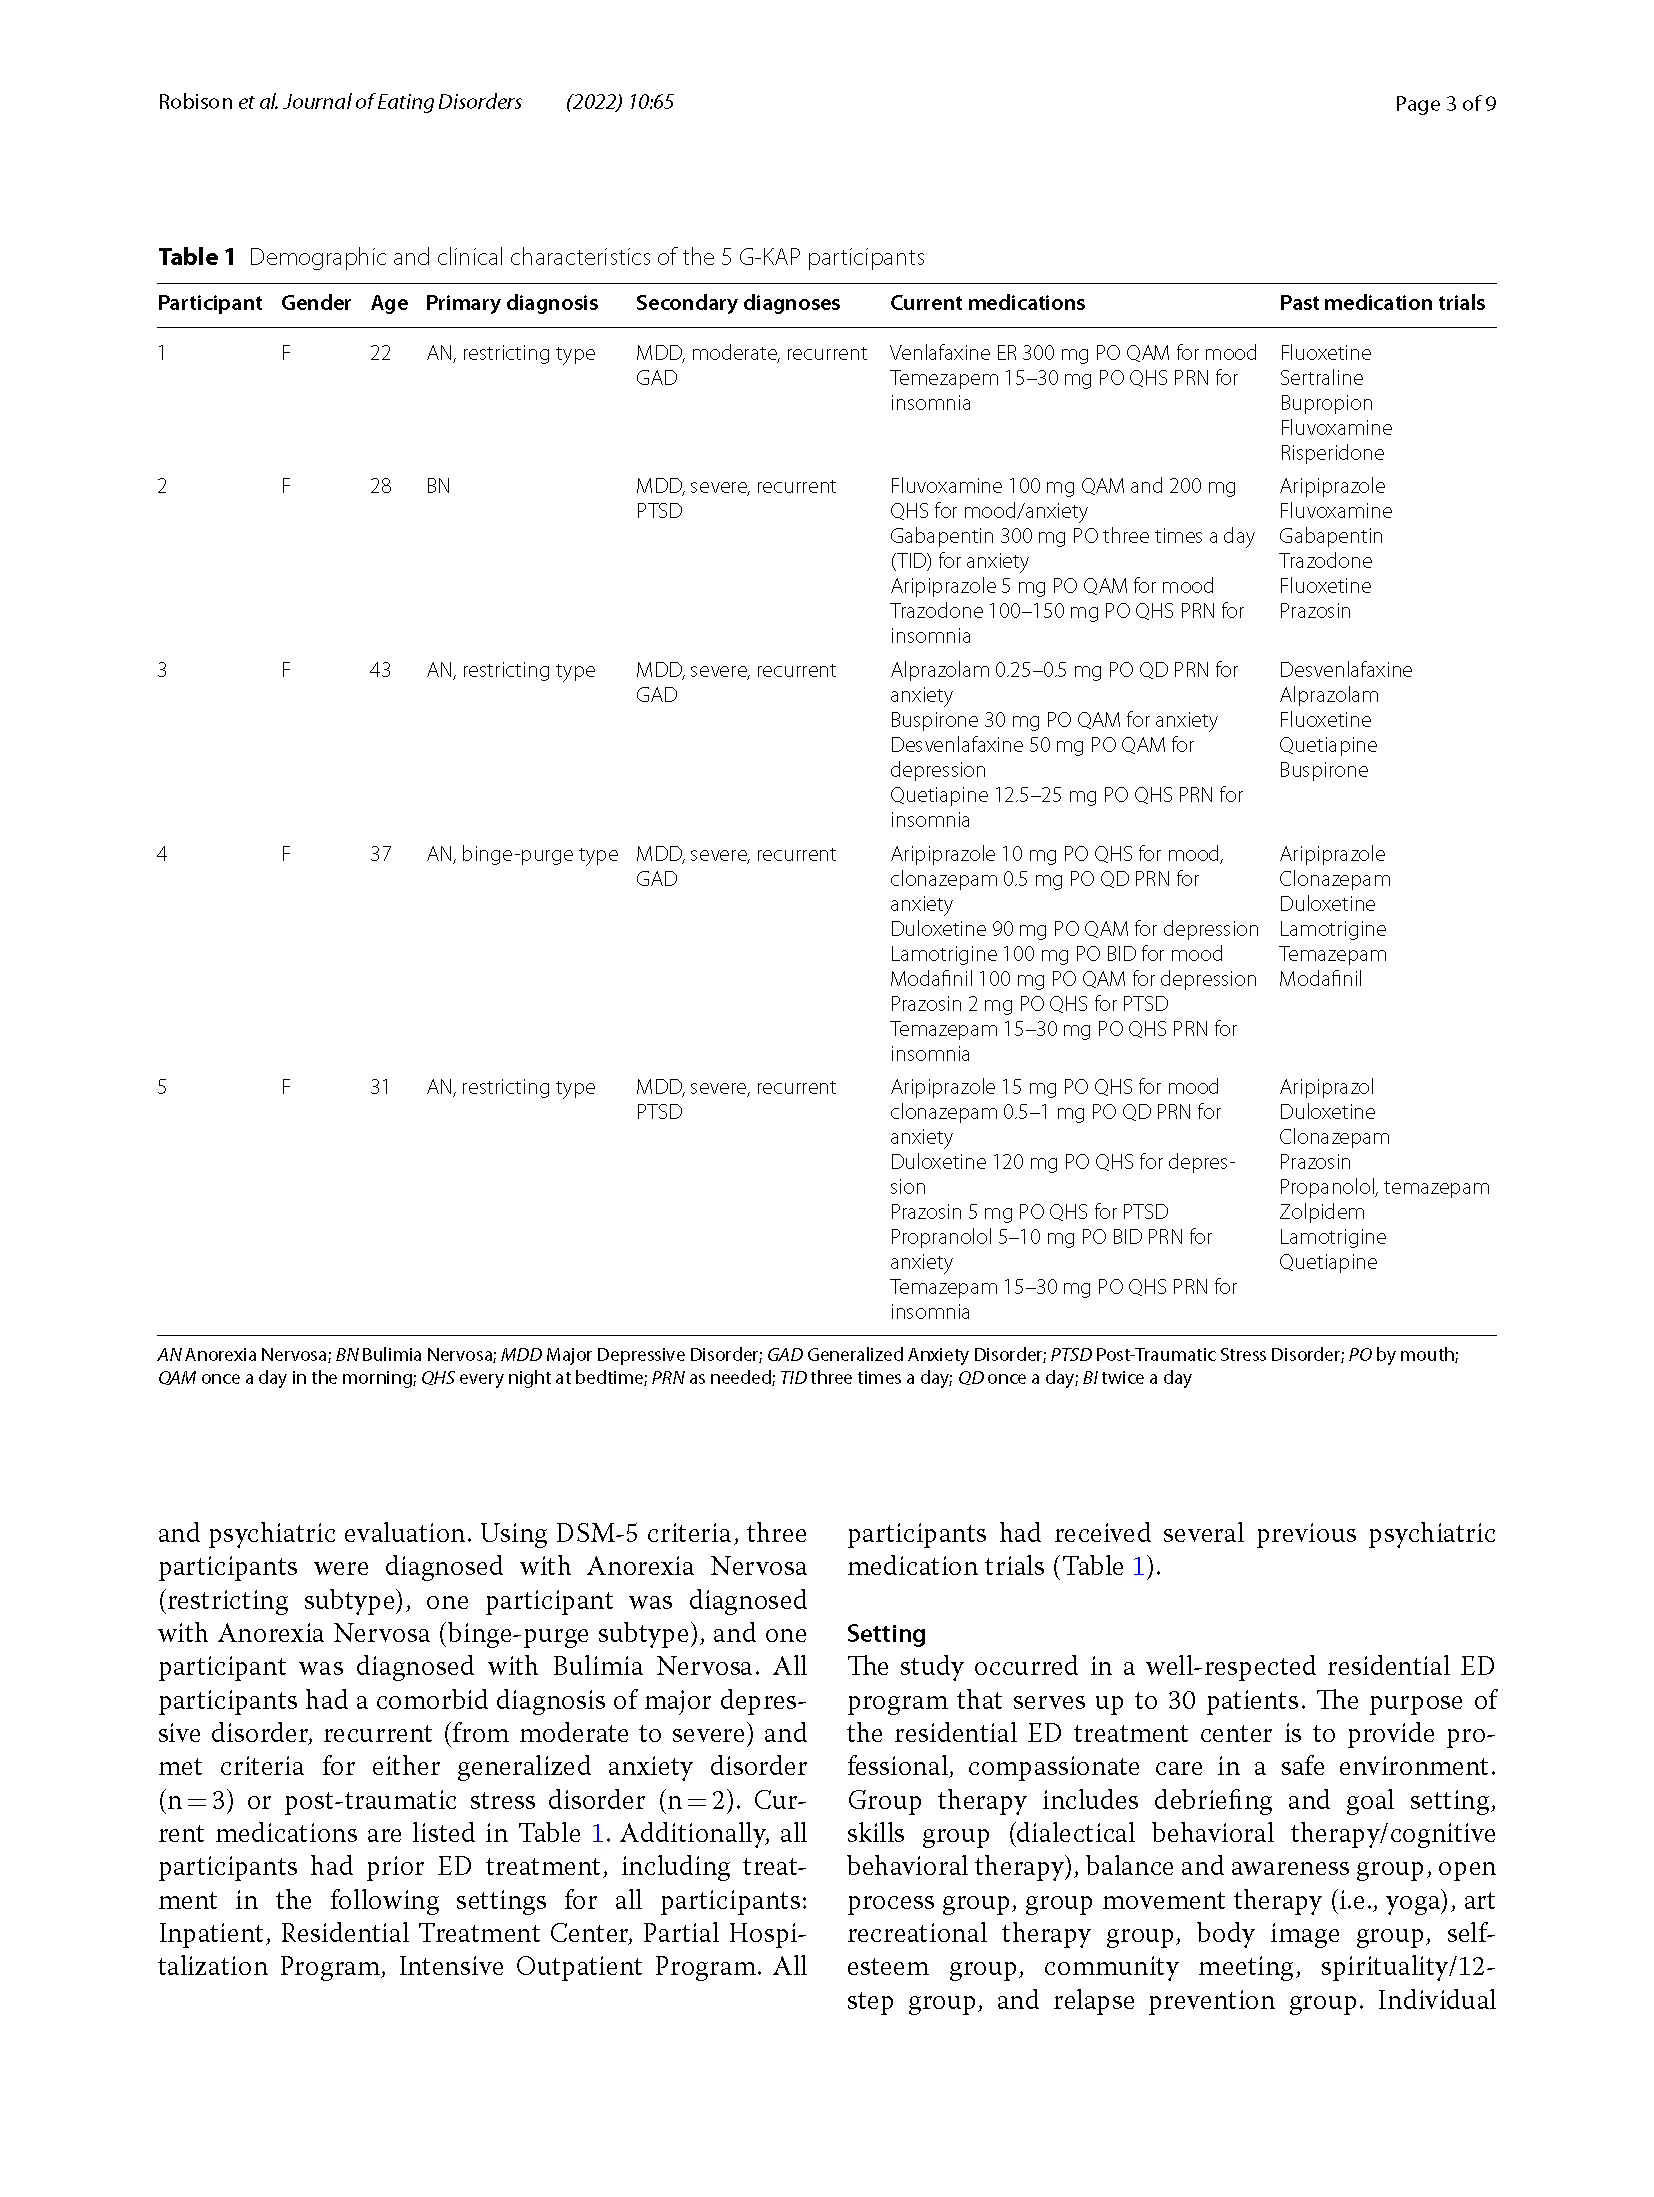 Group-based ketamine-assisted psychotherapy for patients in residential treatment for eating disorders with comorbid depression and anxiety disorders_Page_3.png